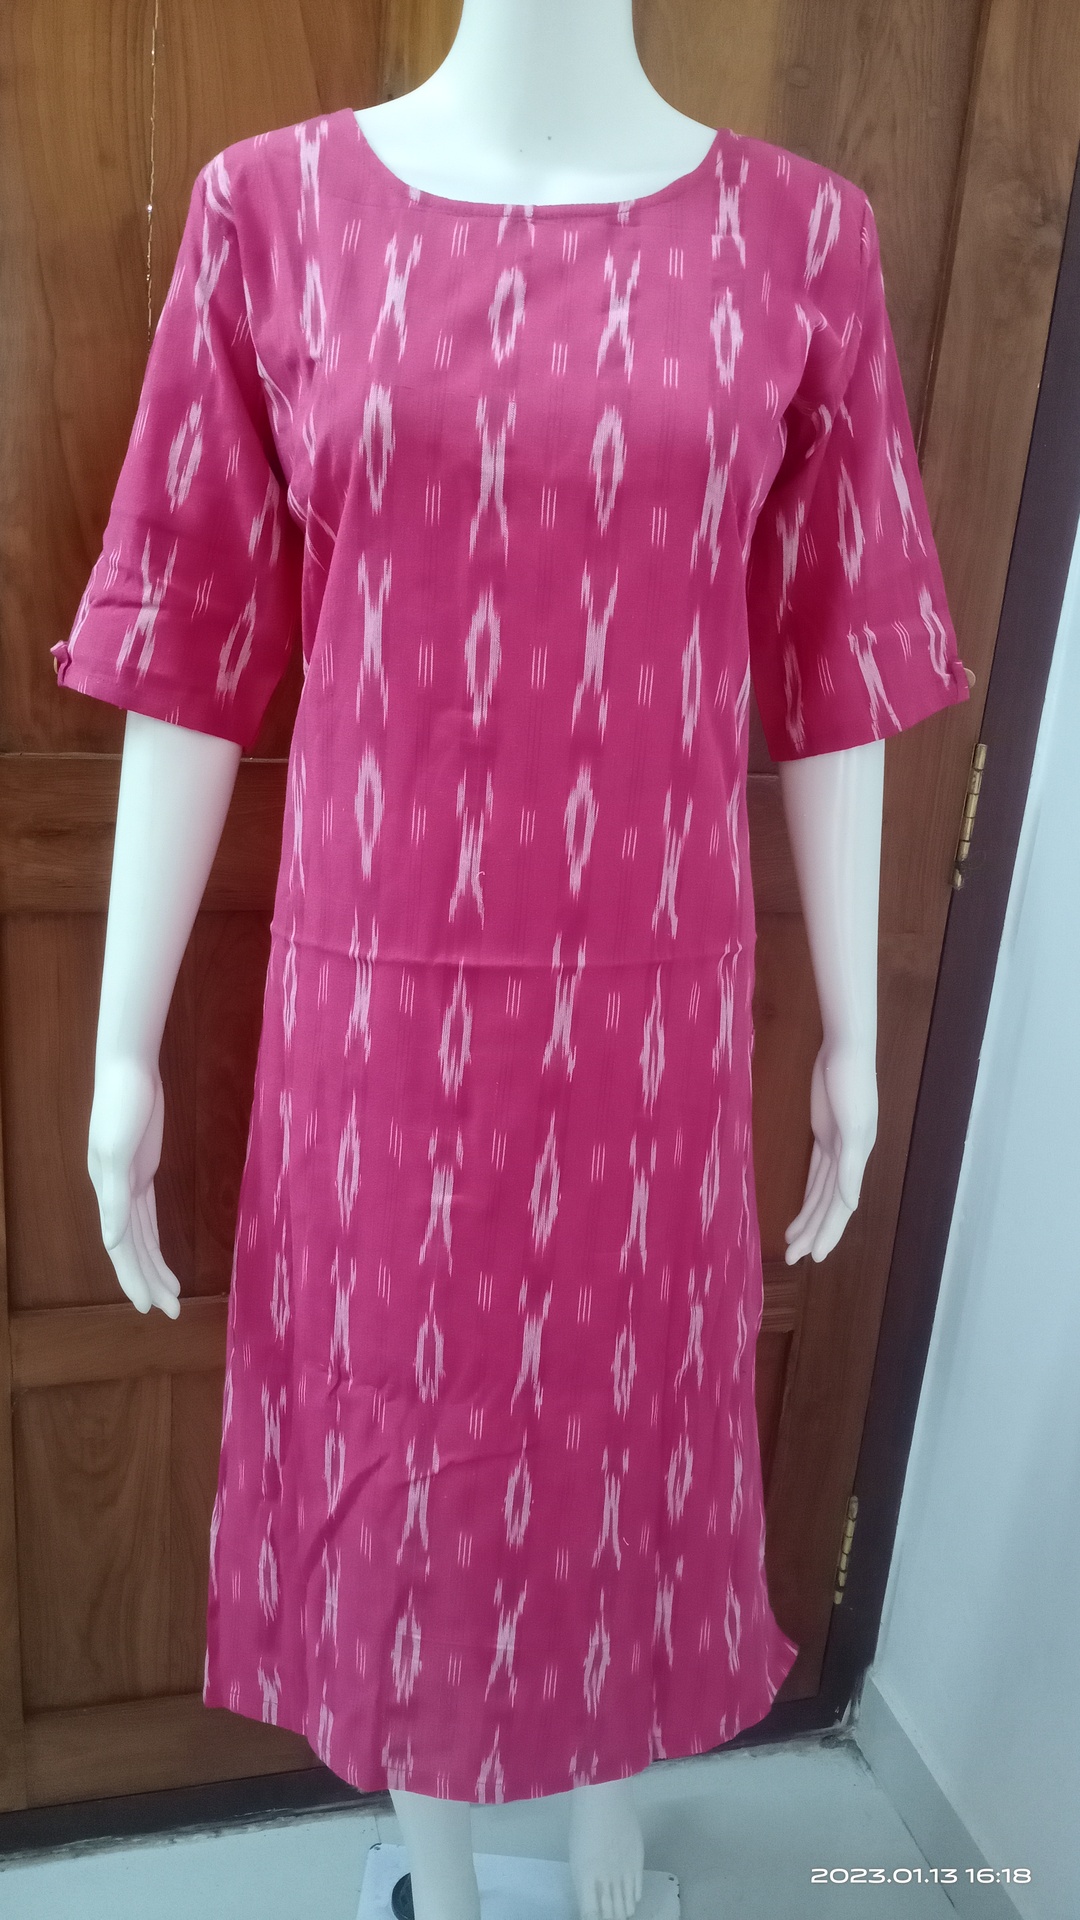 Pink Ikkat Kurti with white lines